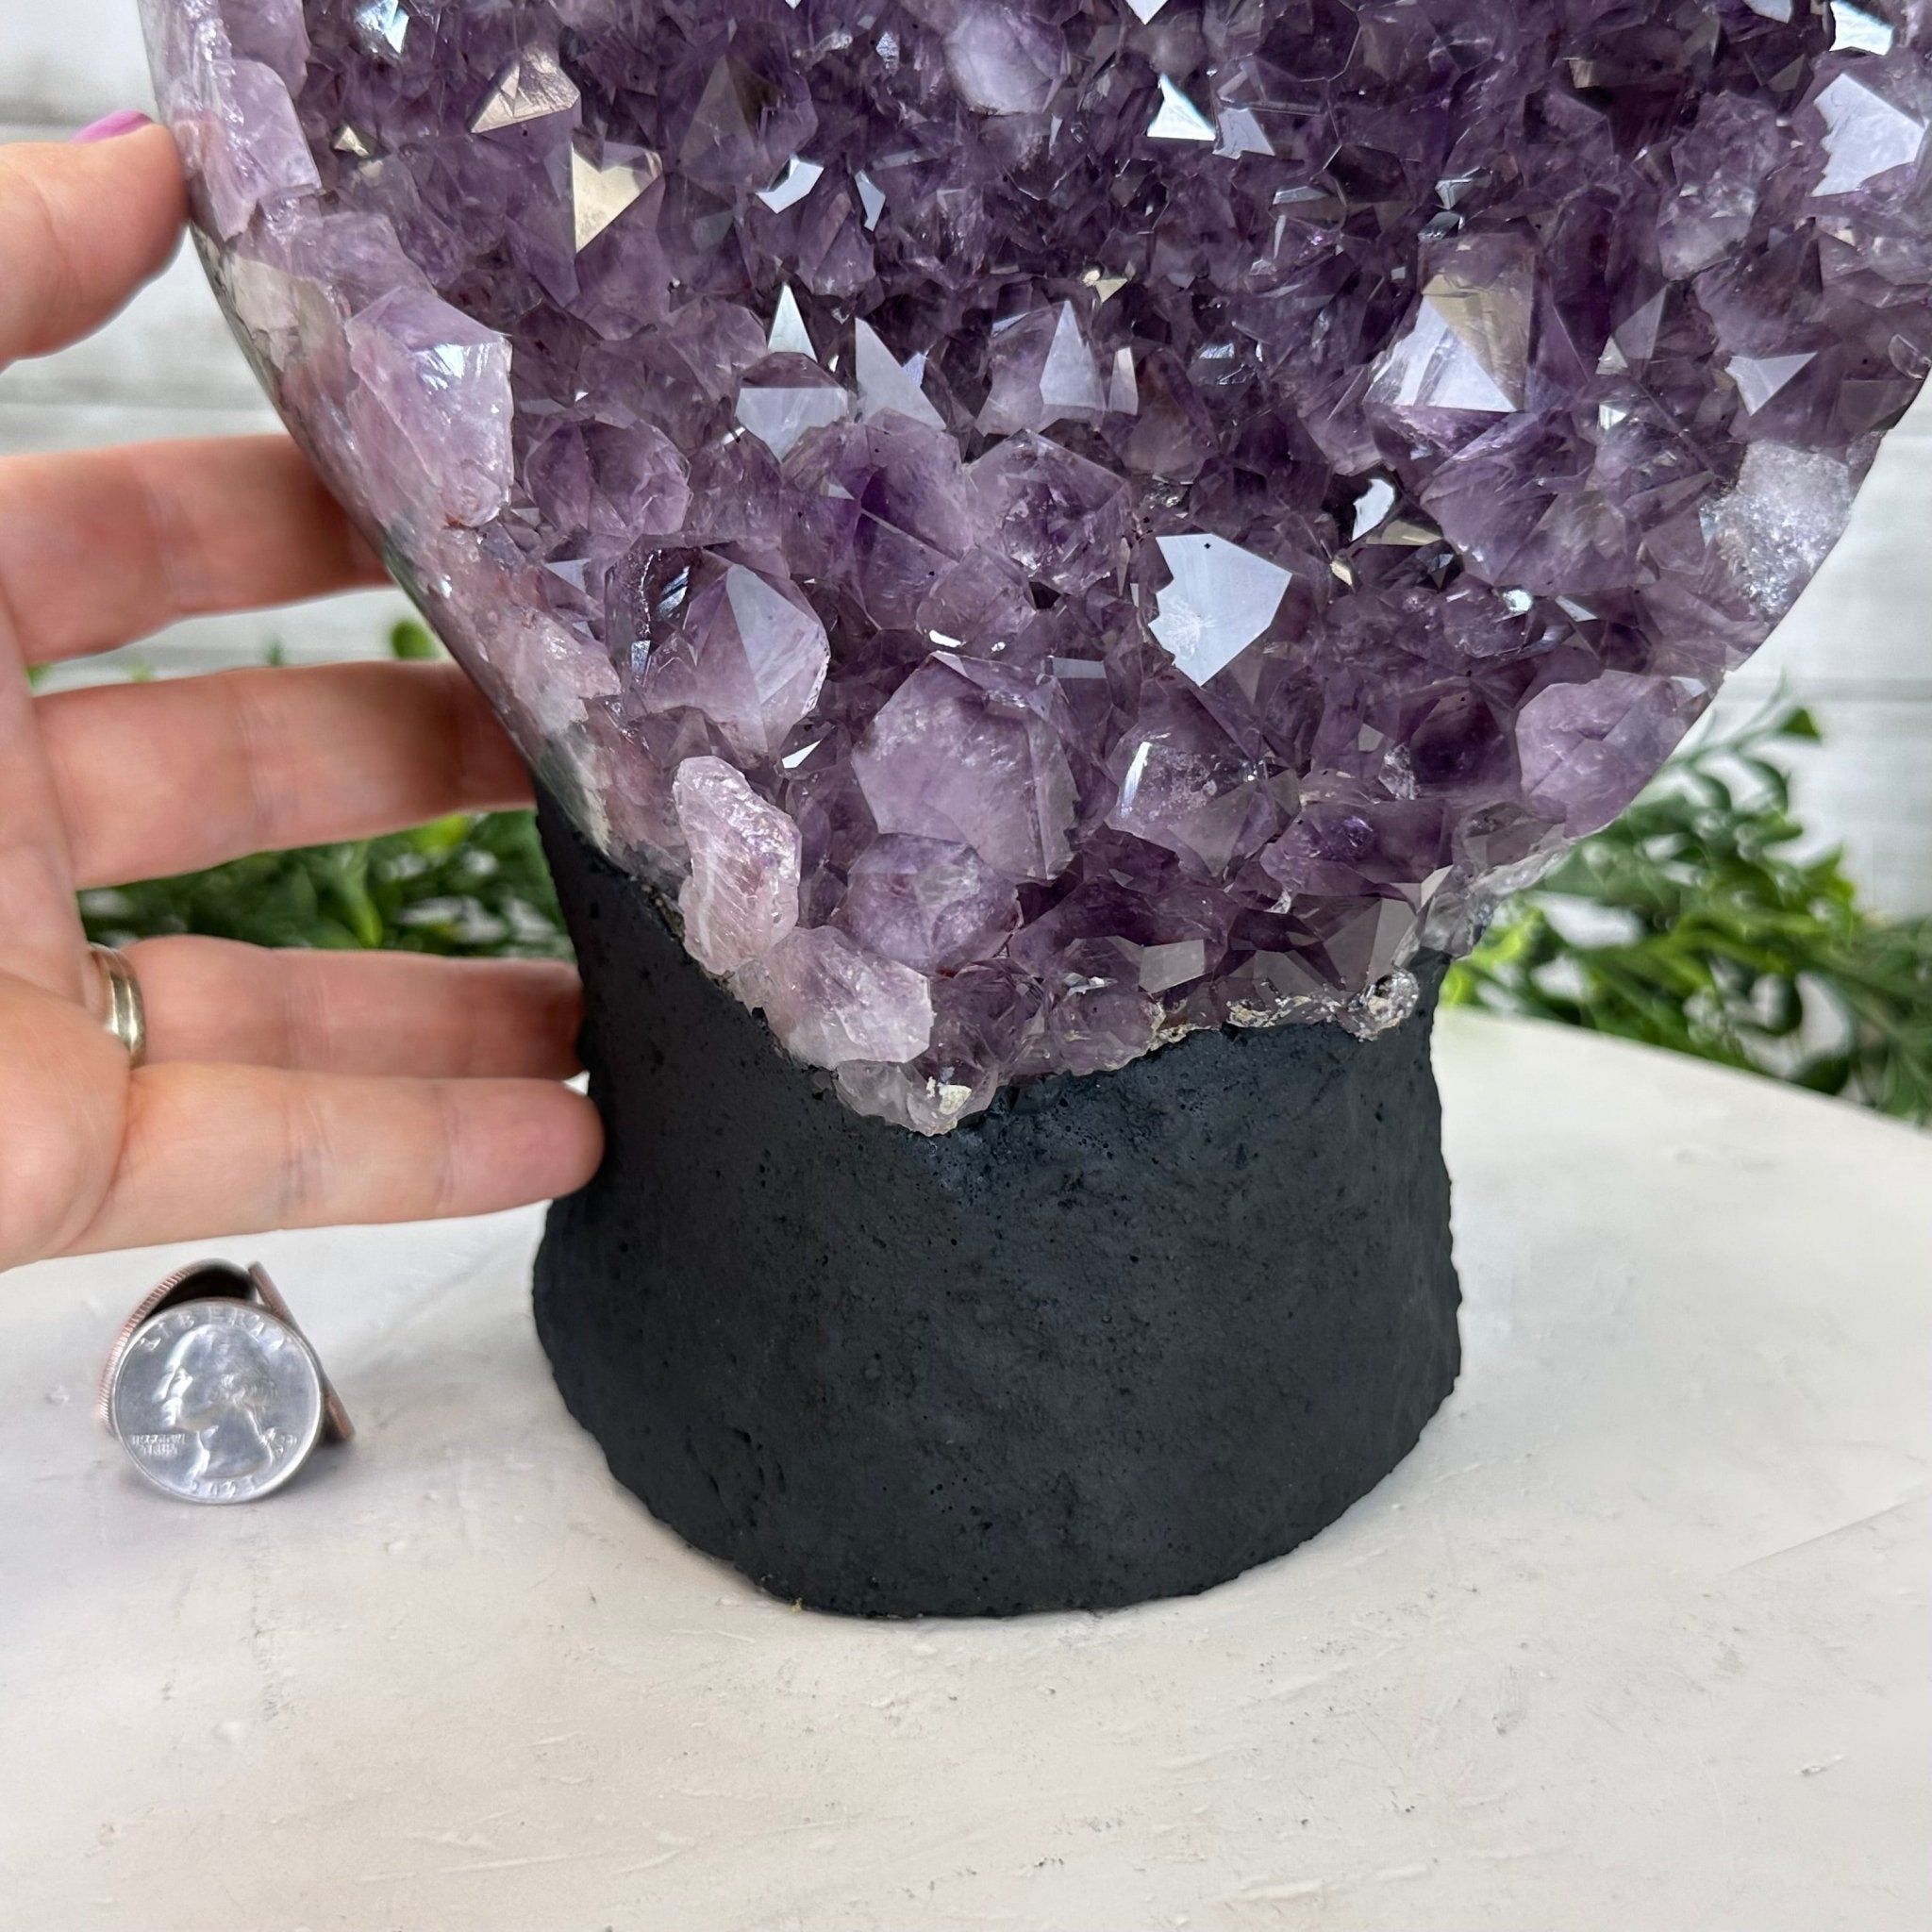 Extra Quality Amethyst Cluster, Cement Base, 10.4" Tall #5614-0112 - Brazil GemsBrazil GemsExtra Quality Amethyst Cluster, Cement Base, 10.4" Tall #5614-0112Clusters on Cement Bases5614-0112